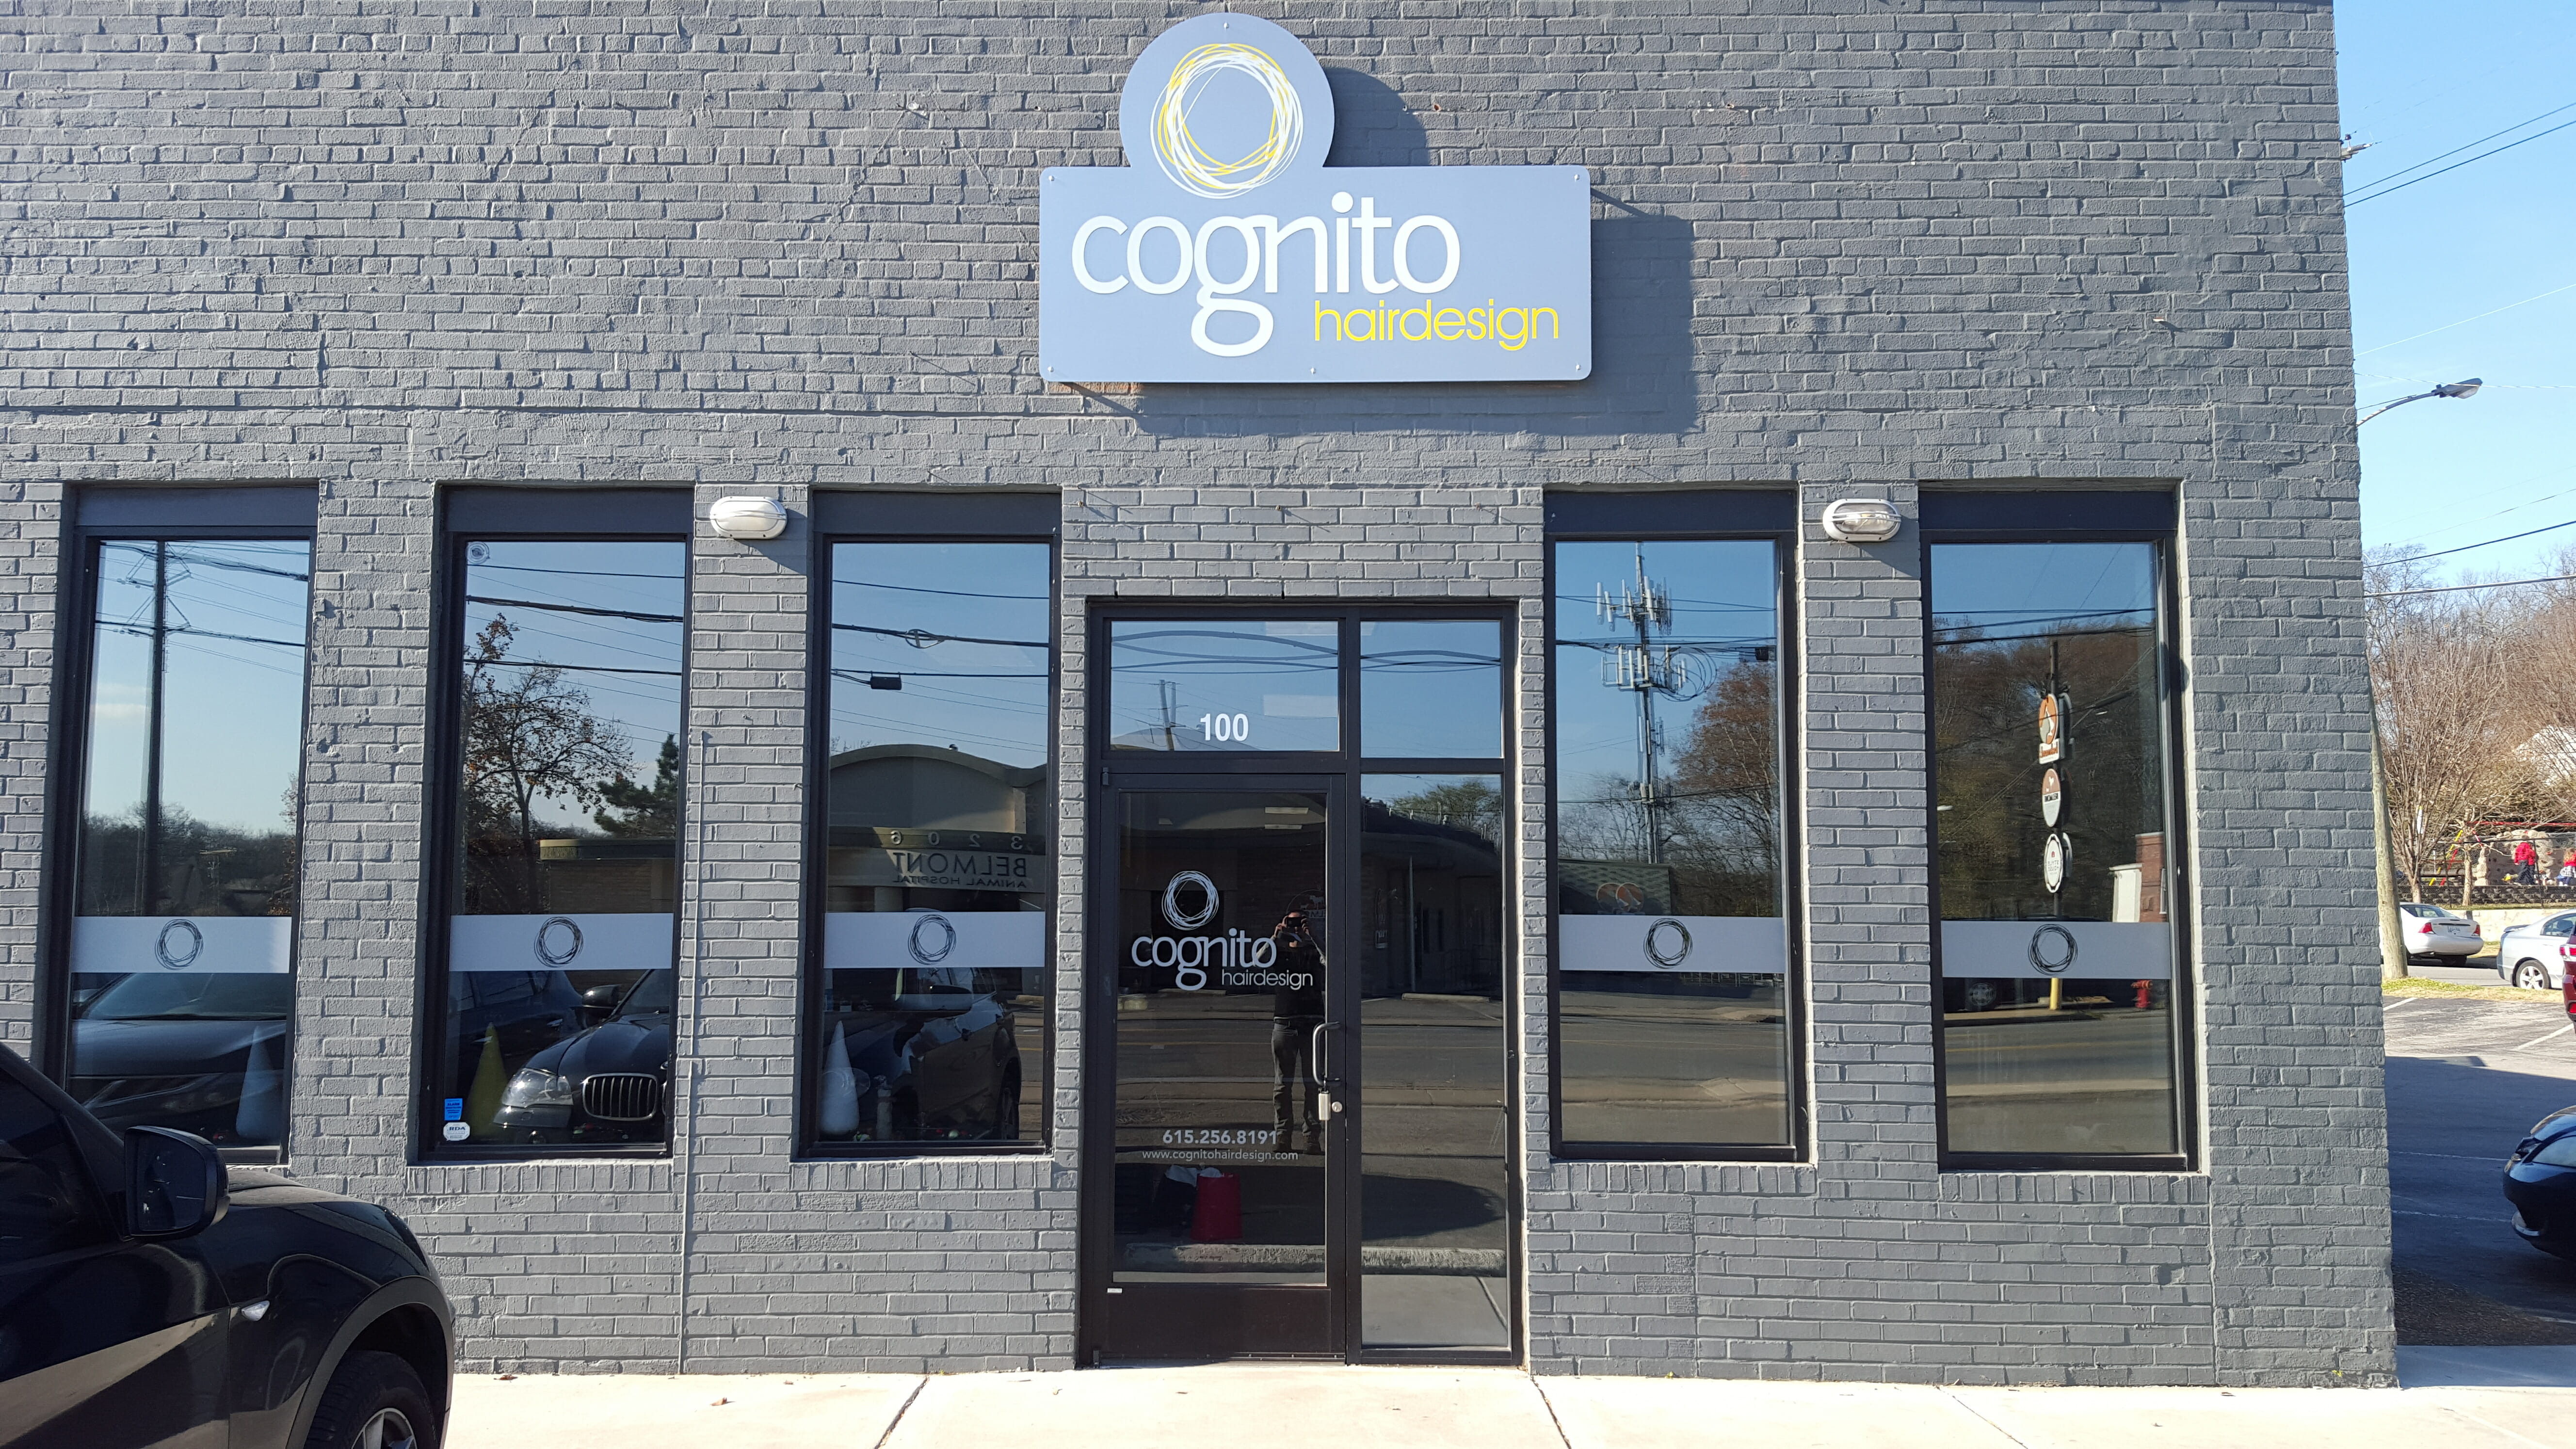 Cognito storefront sign